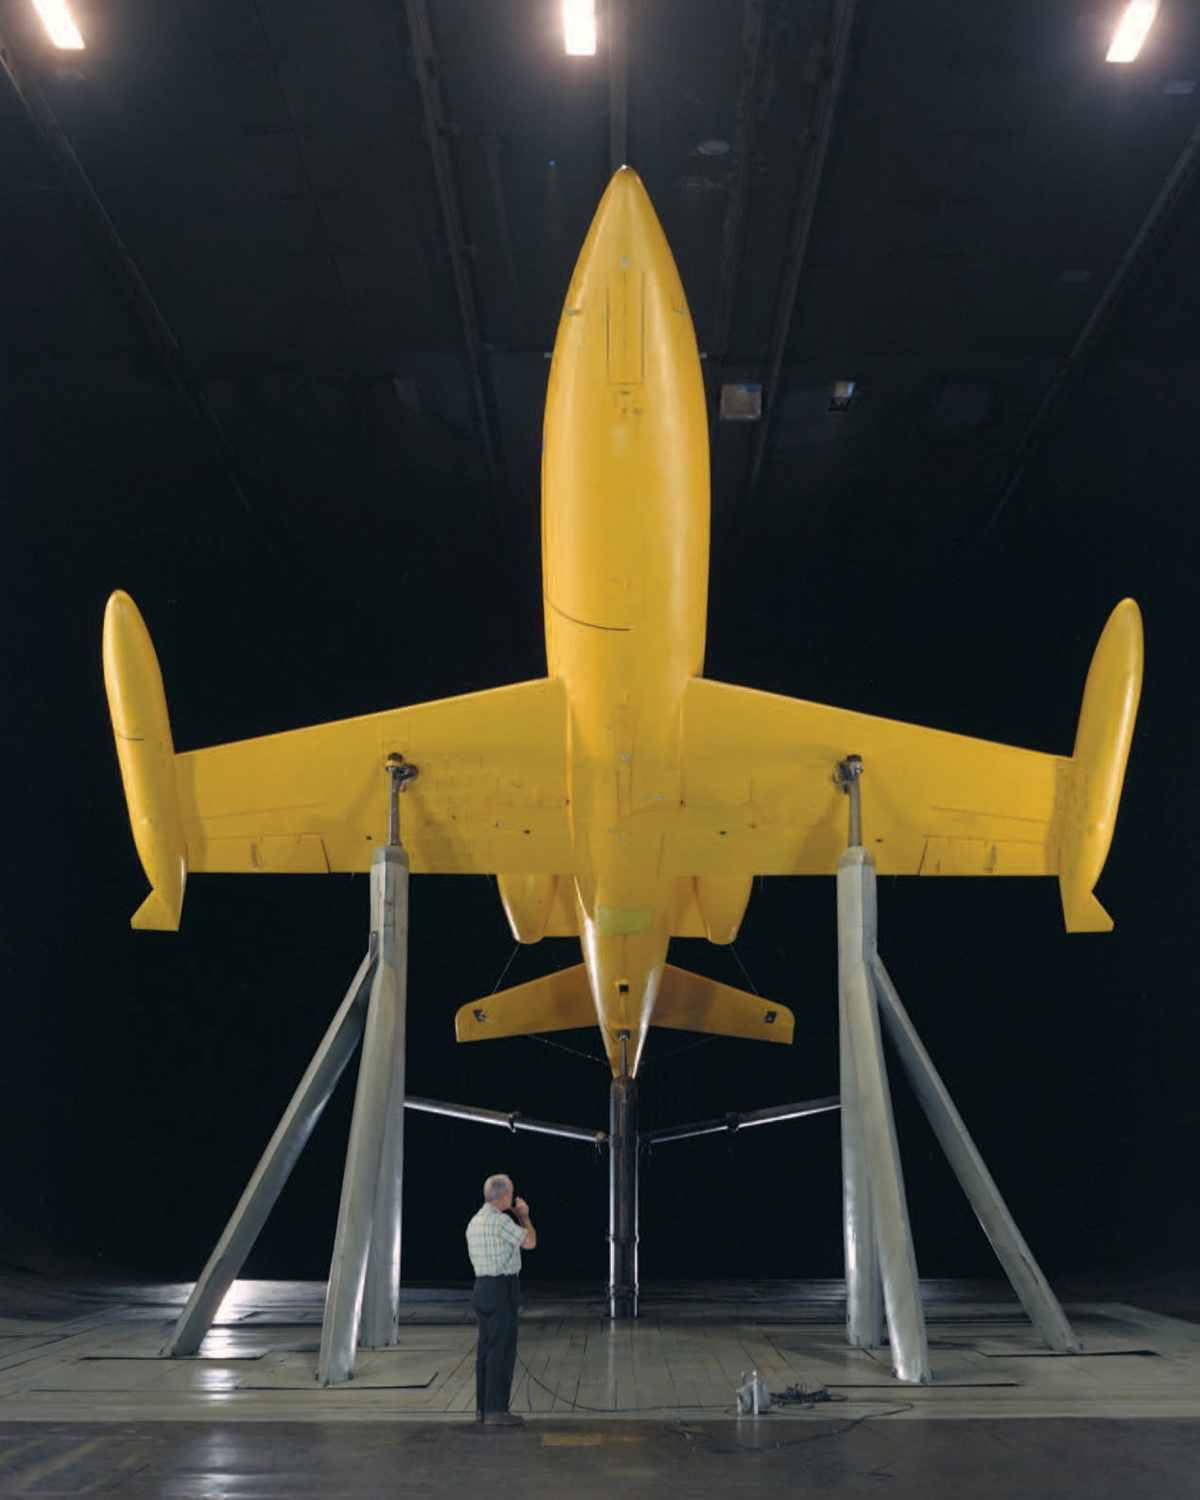 A sleek, yellow jet with its nose cone pointed up toward the wind tunnel ceiling is studied by a man standing beneath its aerodynamic wings.